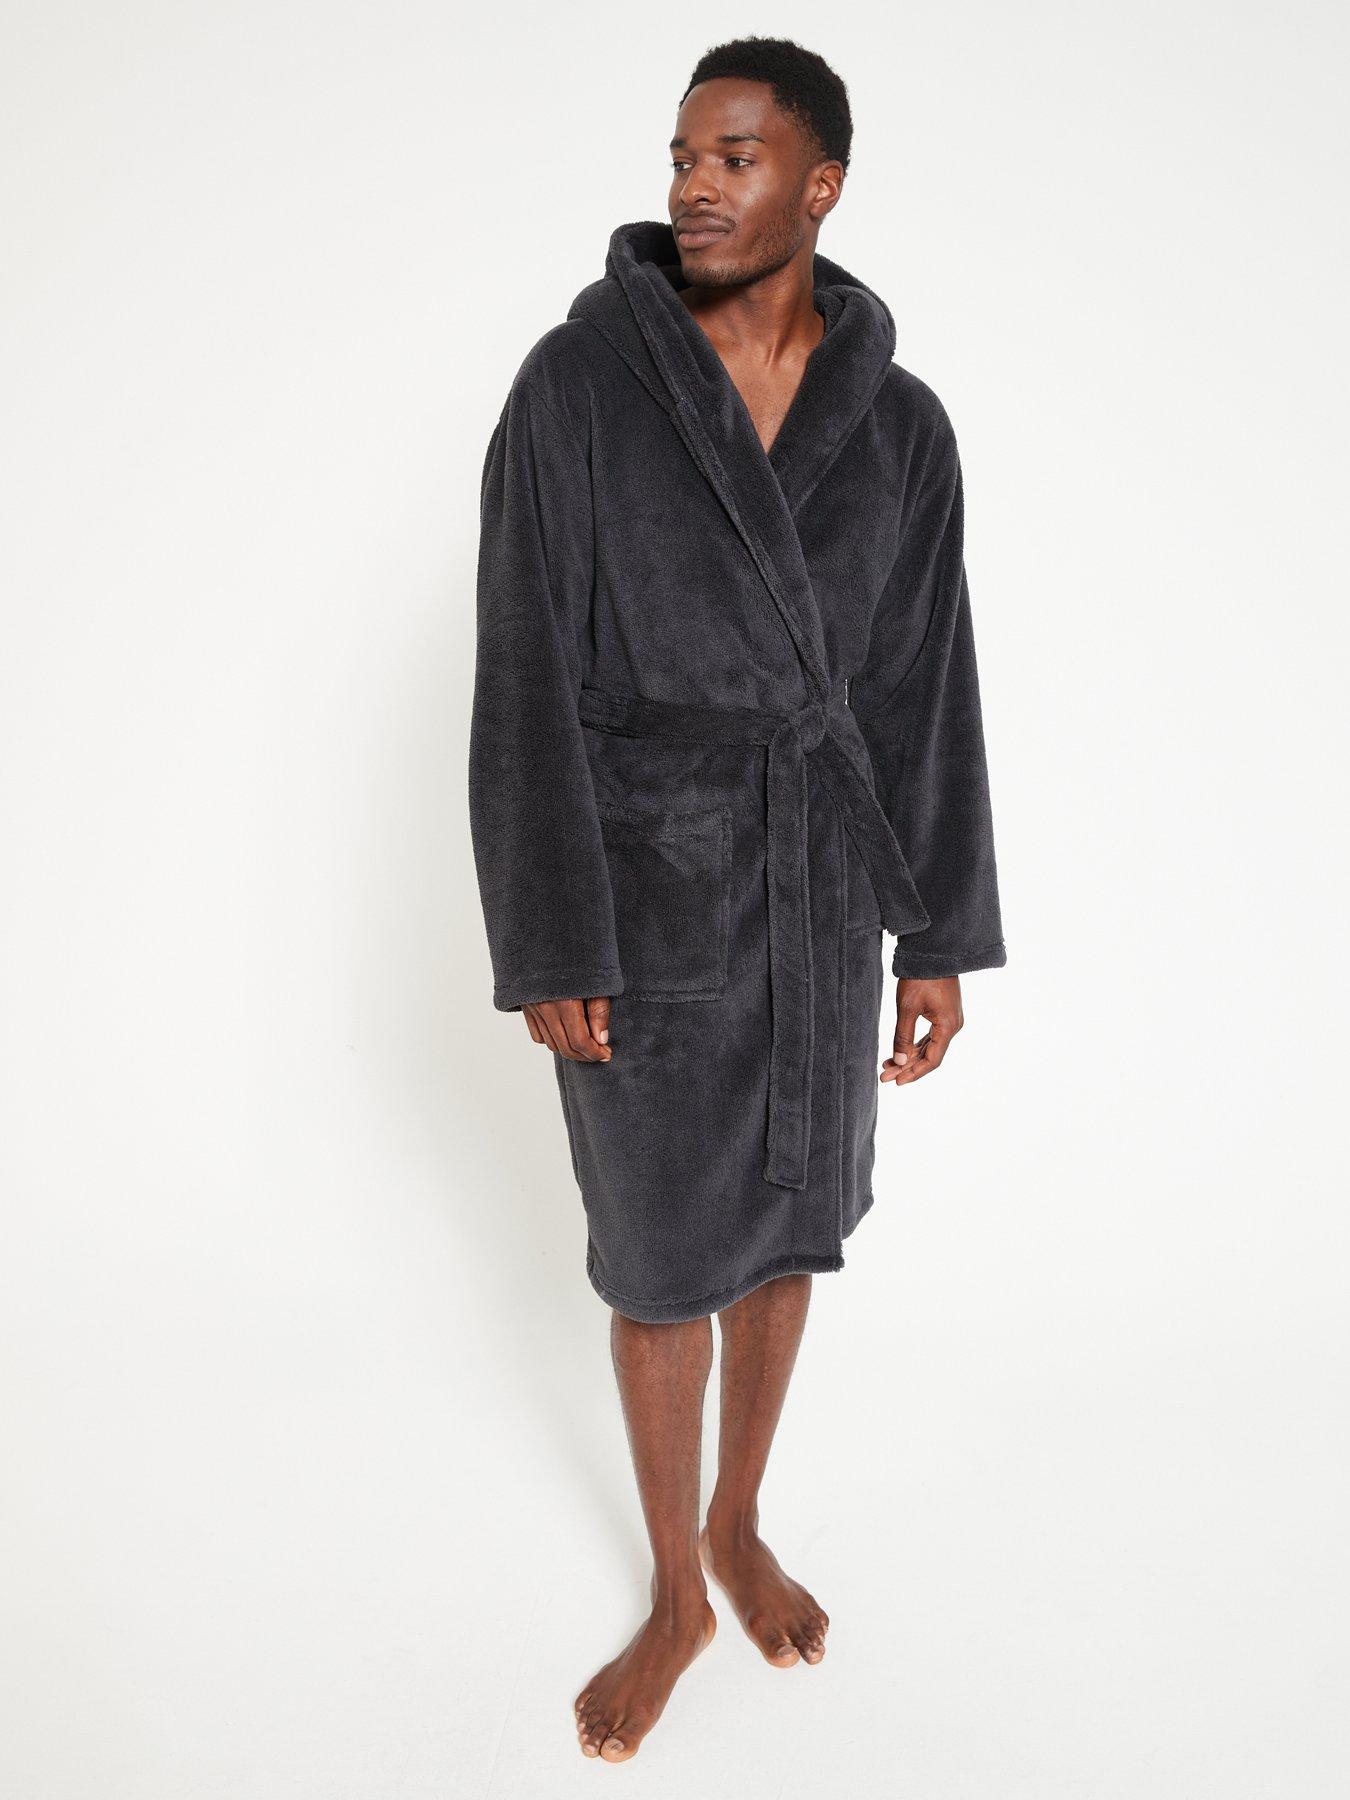 Mens Waffle Fleece Dressing Gown, Nightwear | Country Collection